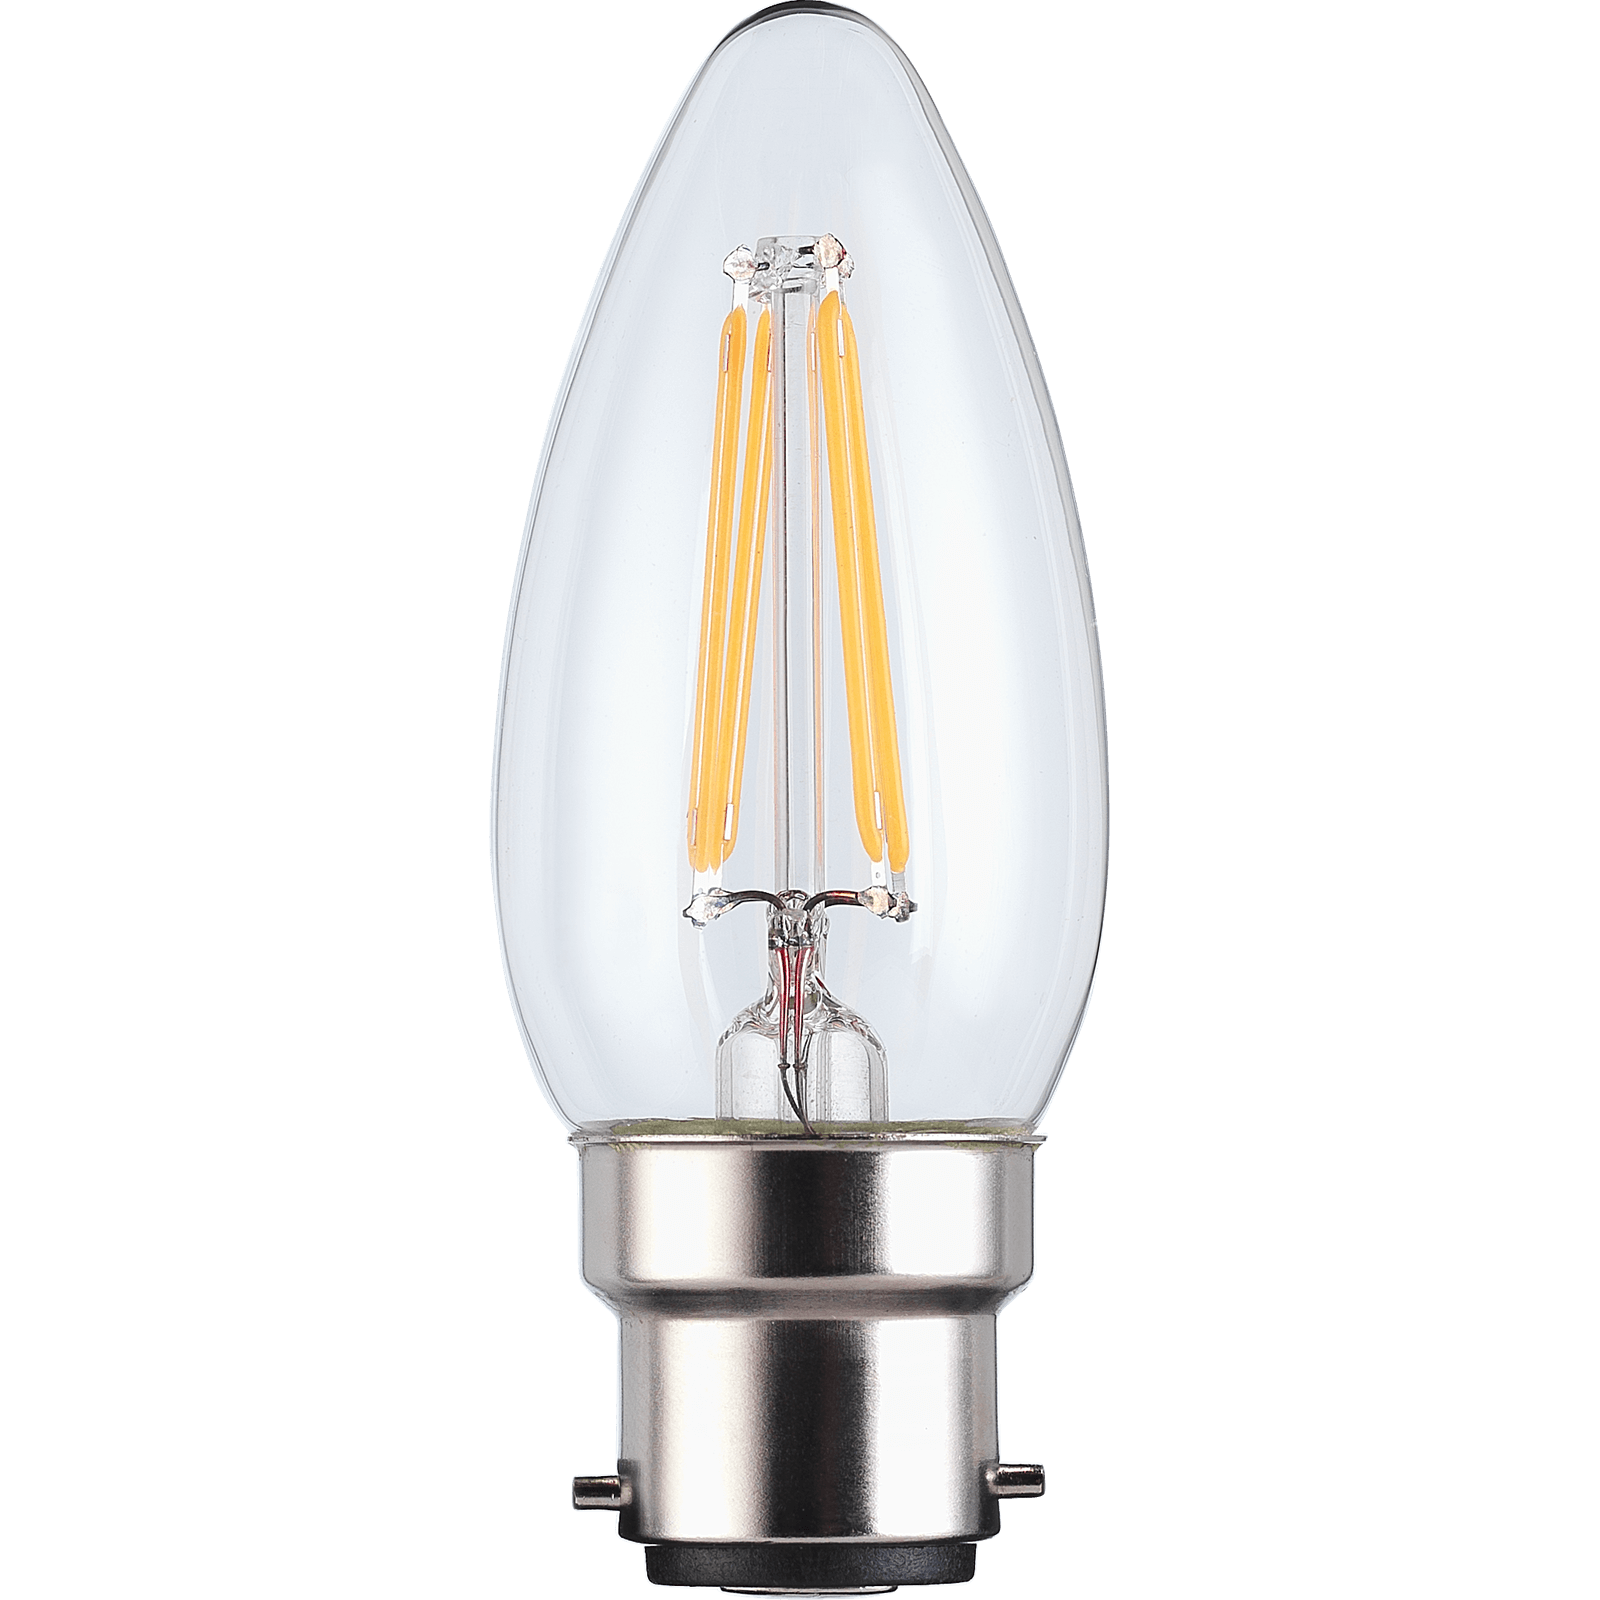 Photo of Tcp Filament Candle Clear 40w Bc Light Bulb - 3 Pack